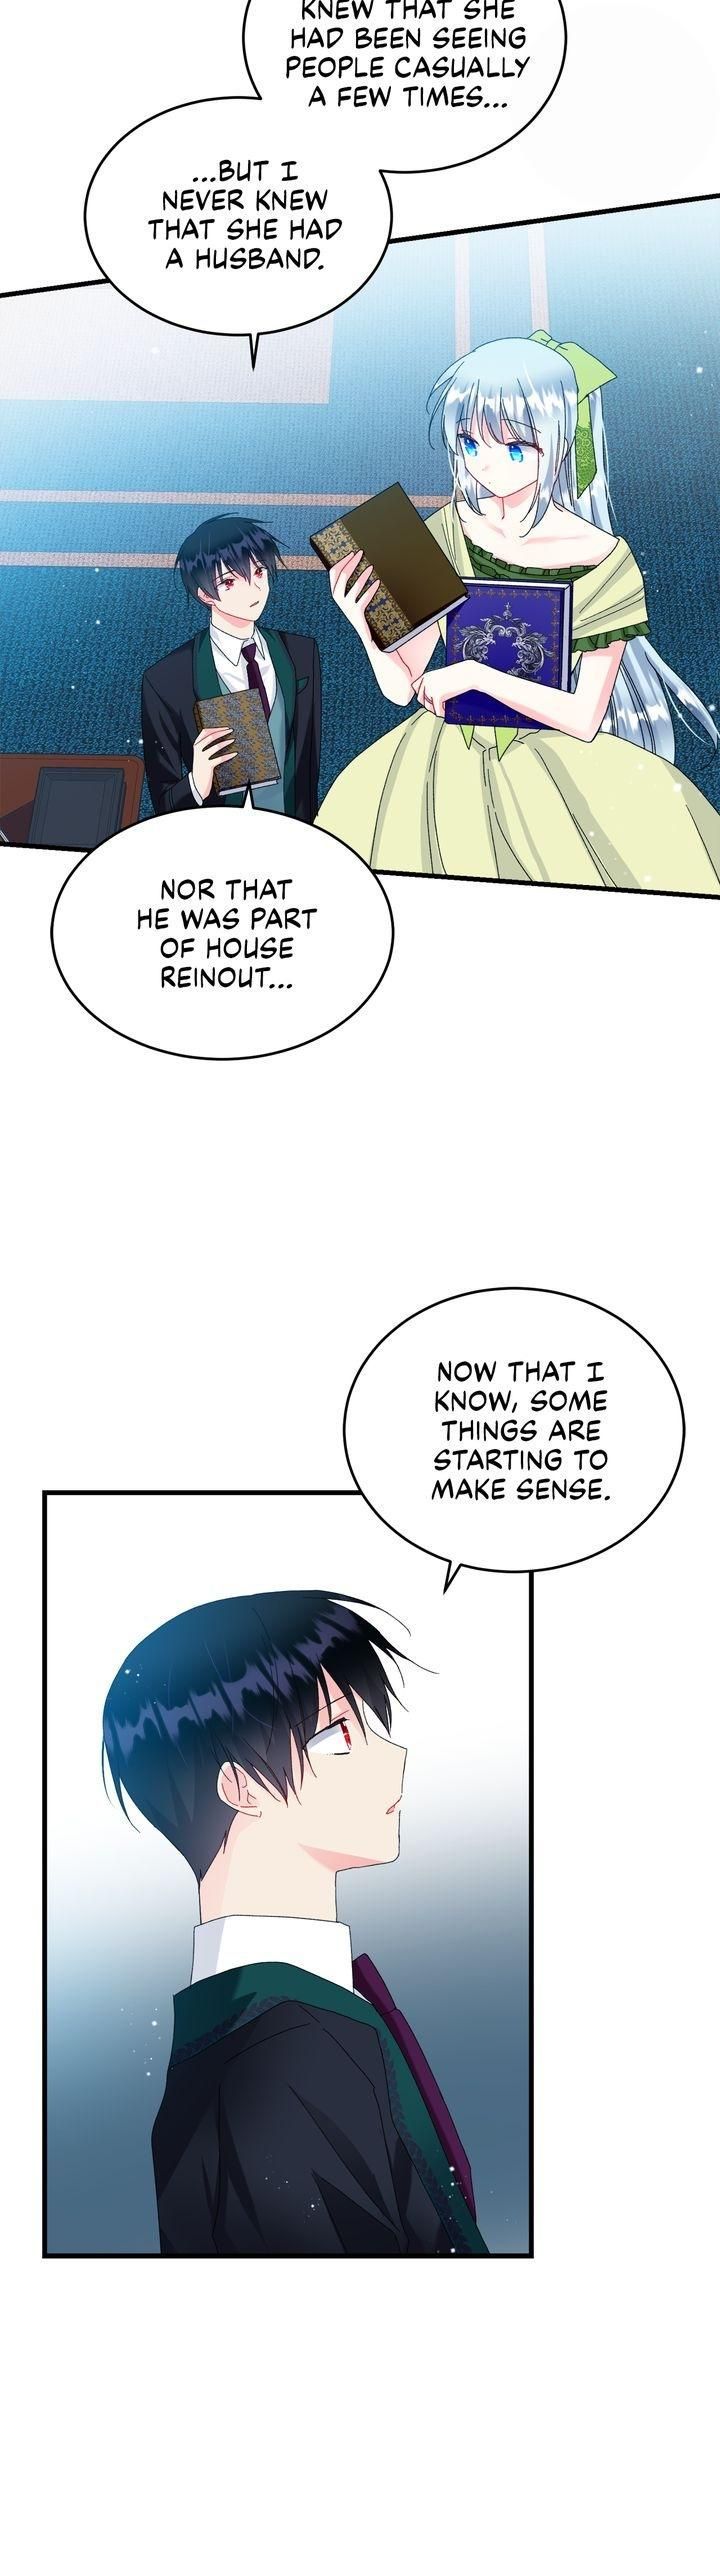 The Lady's Butler Chapter 71 page 7